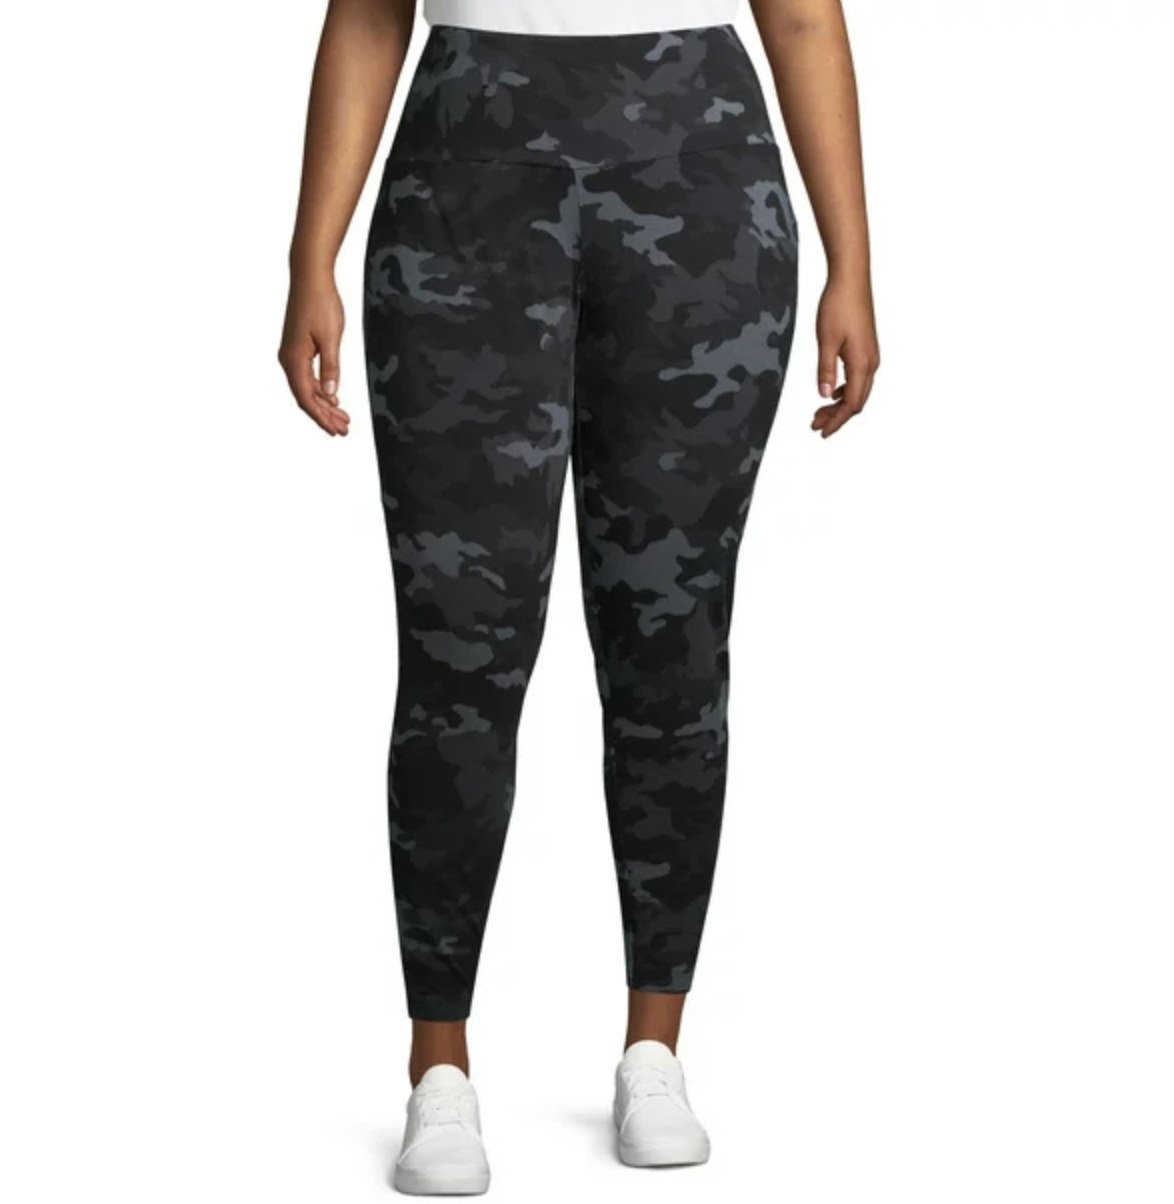 A pair of camouflage leggings